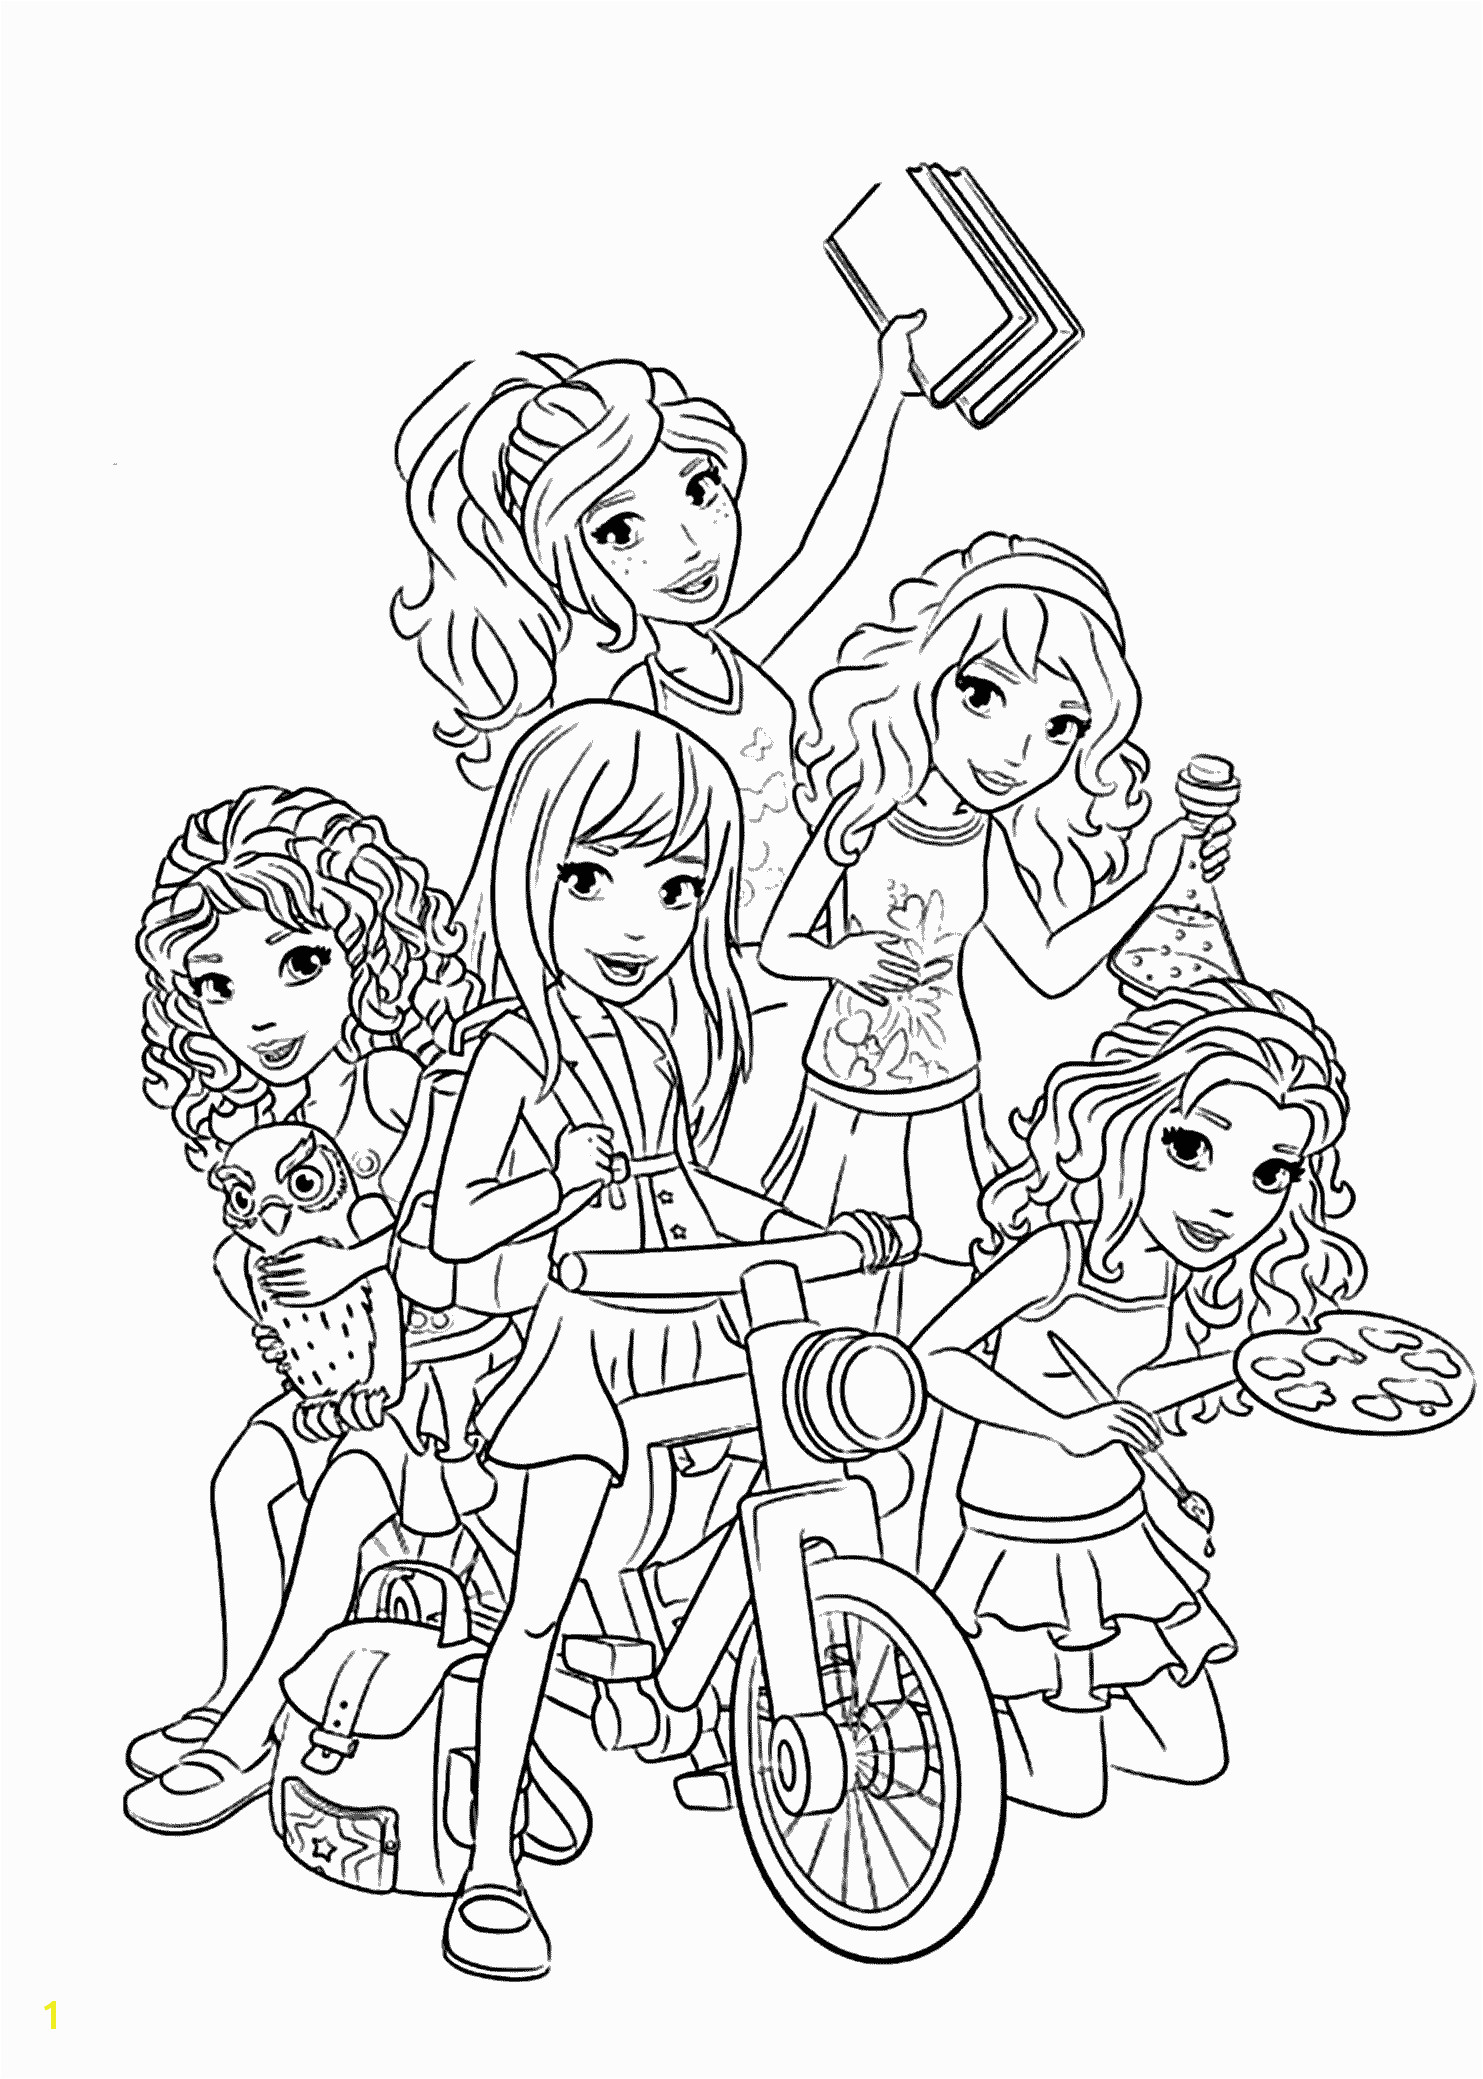 Lego Friends all coloring page for kids printable free Lego Friends